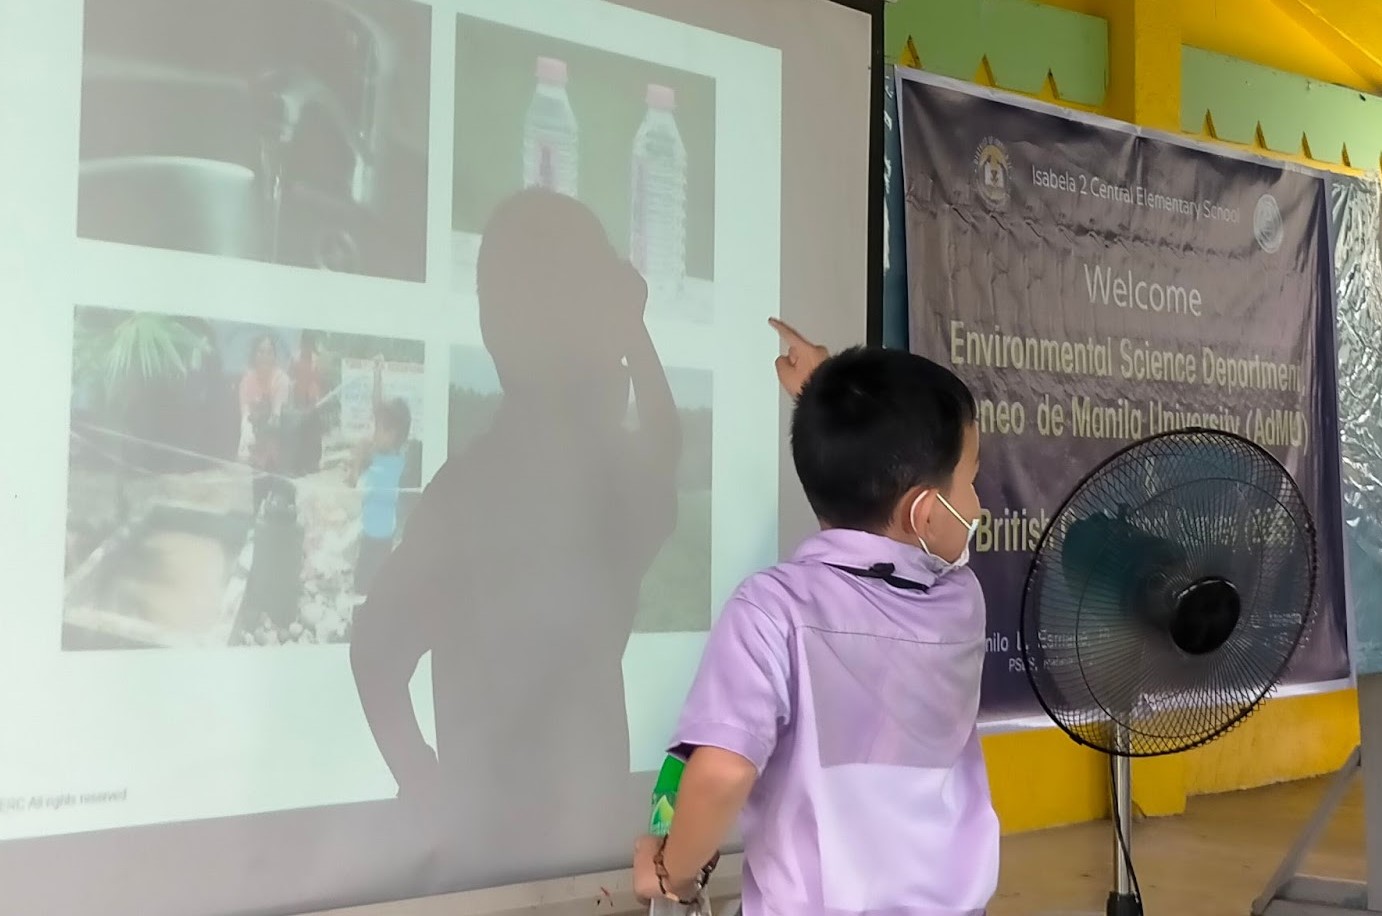 A student from Isabela-3 Central Elementary School interacts with the lecture on groundwater.